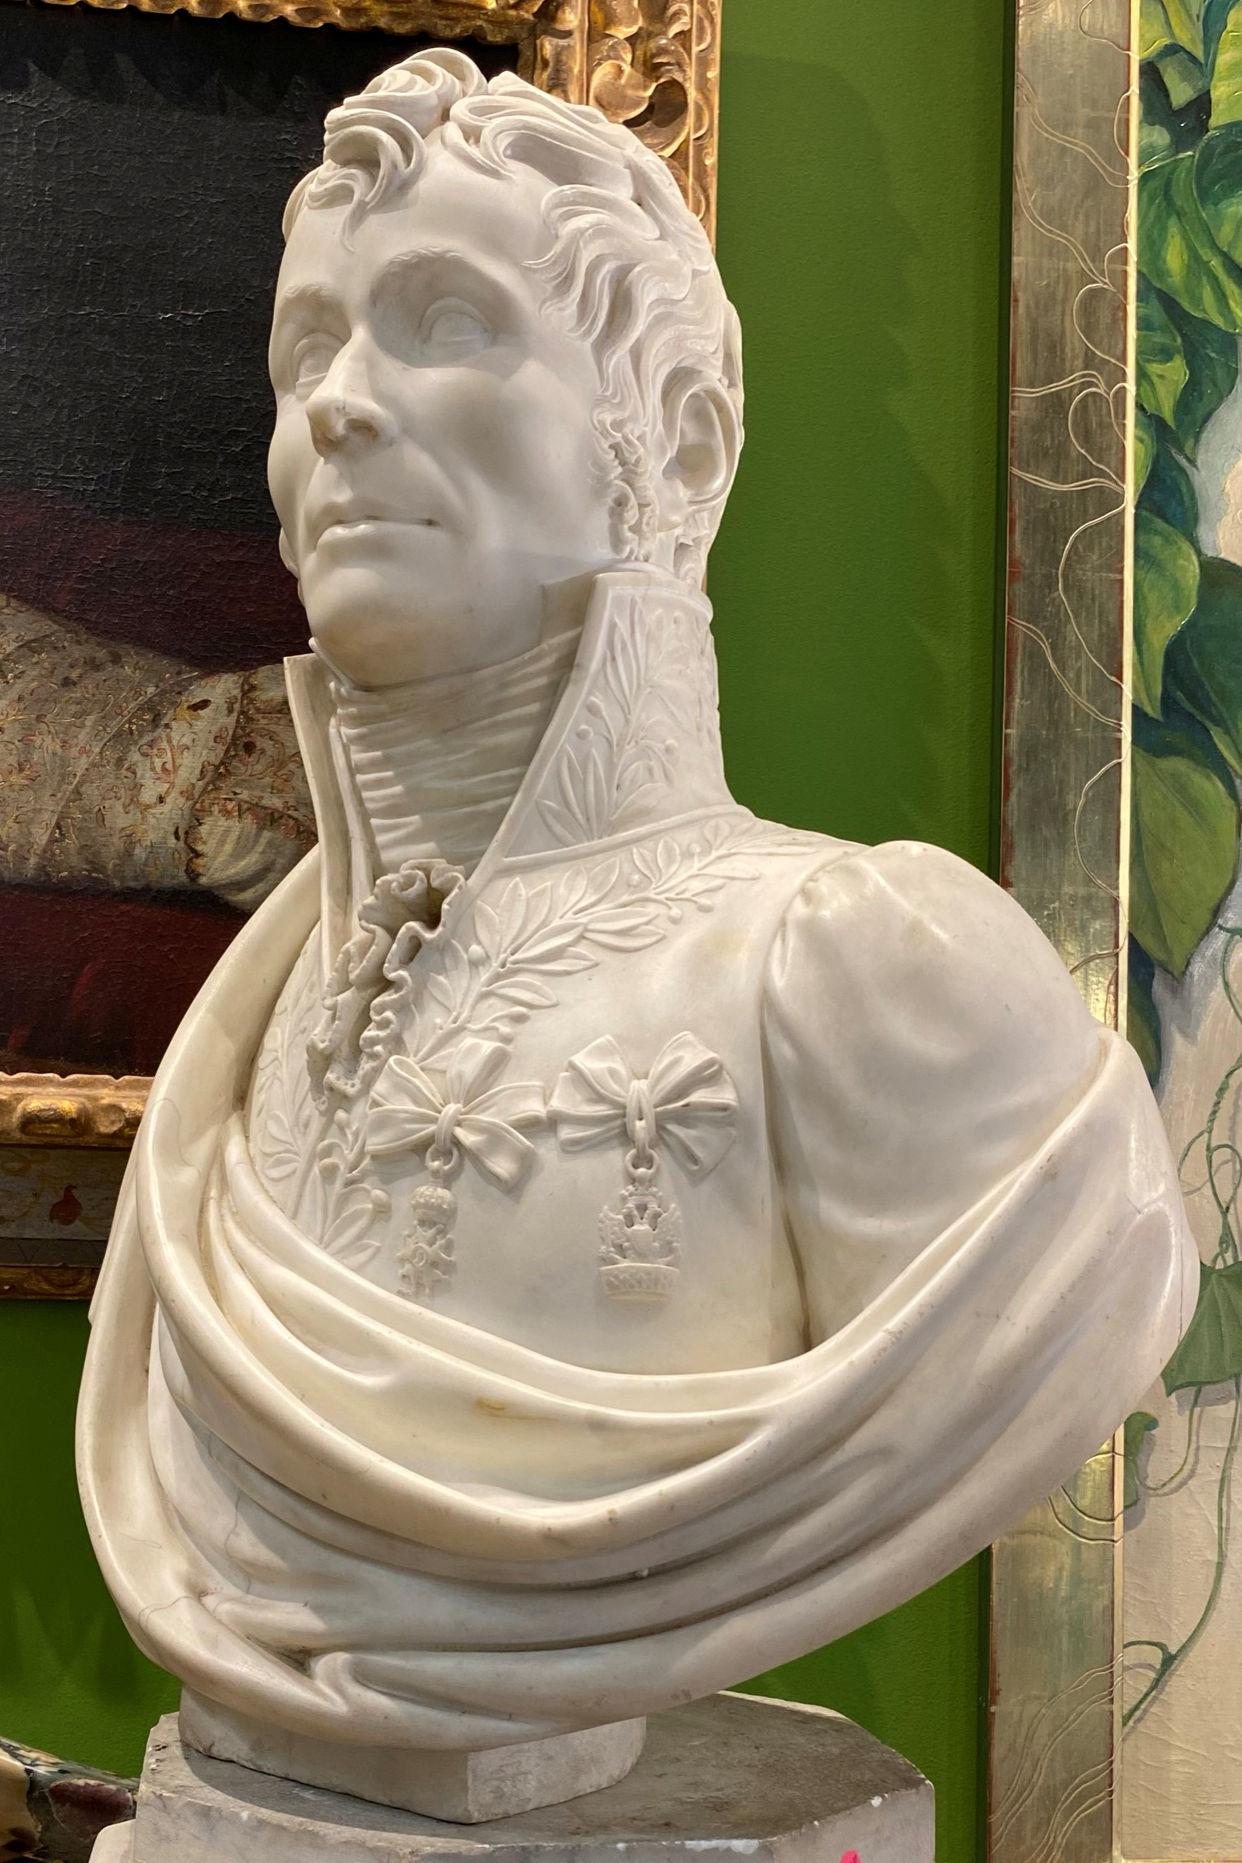 Our very rare marble bust of Jérôme-Napoleon Bonaparte (1784-1860) dating from the first quarter of the nineteenth century is attributed to the circle of Joseph Chinard (1756-1813).  It measures 26.75 in (68 cm) tall and 19.5 in (49.5 cm) wide, and